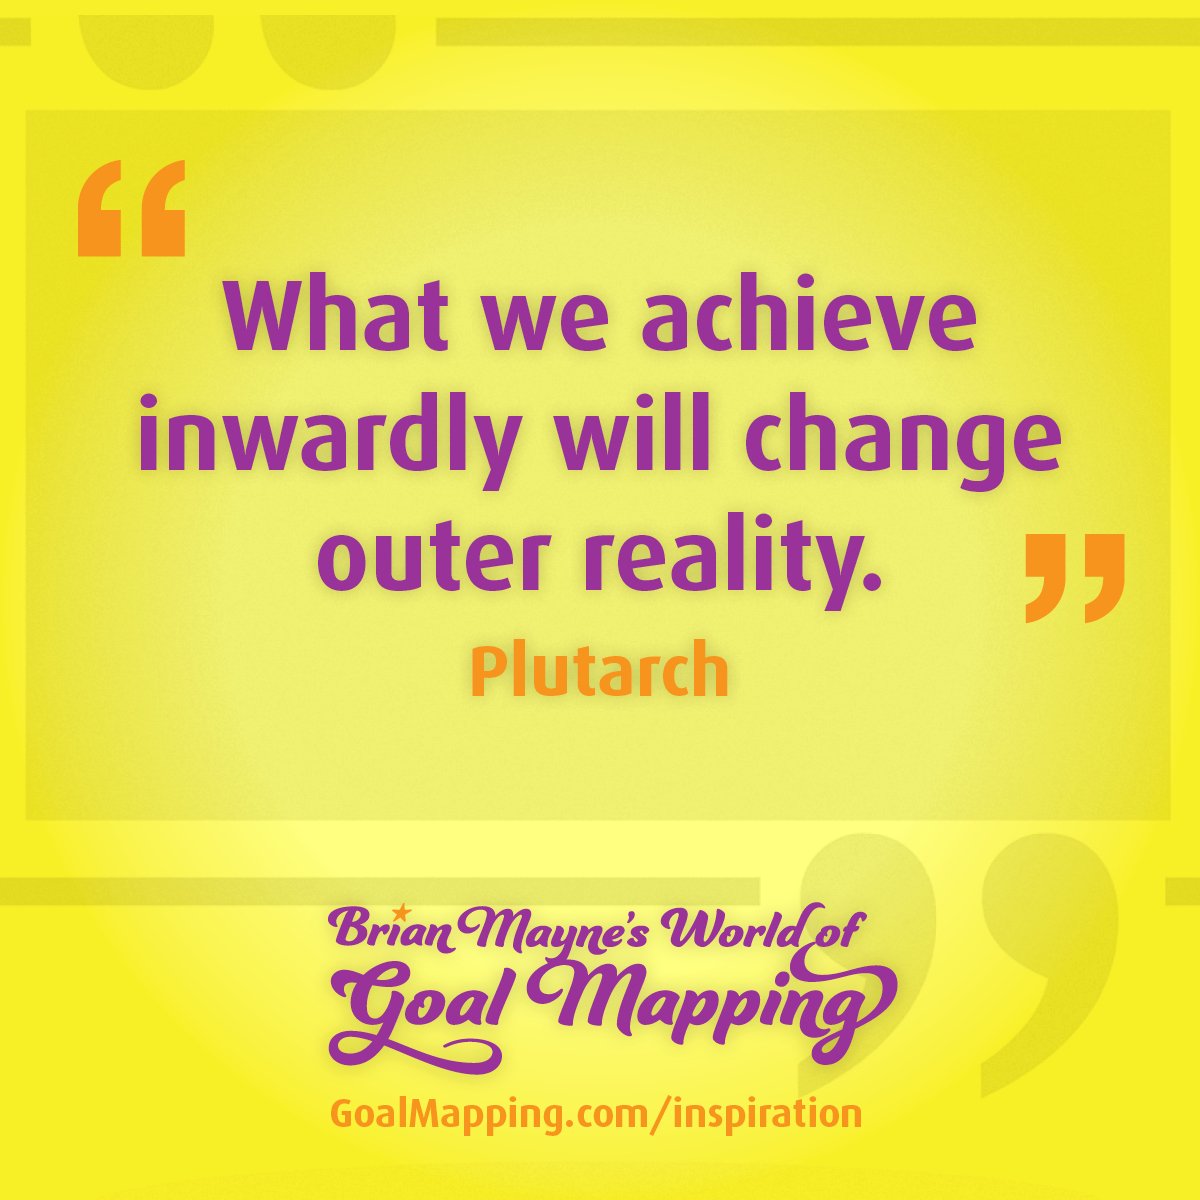 "What we achieve inwardly will change outer reality." Plutarch